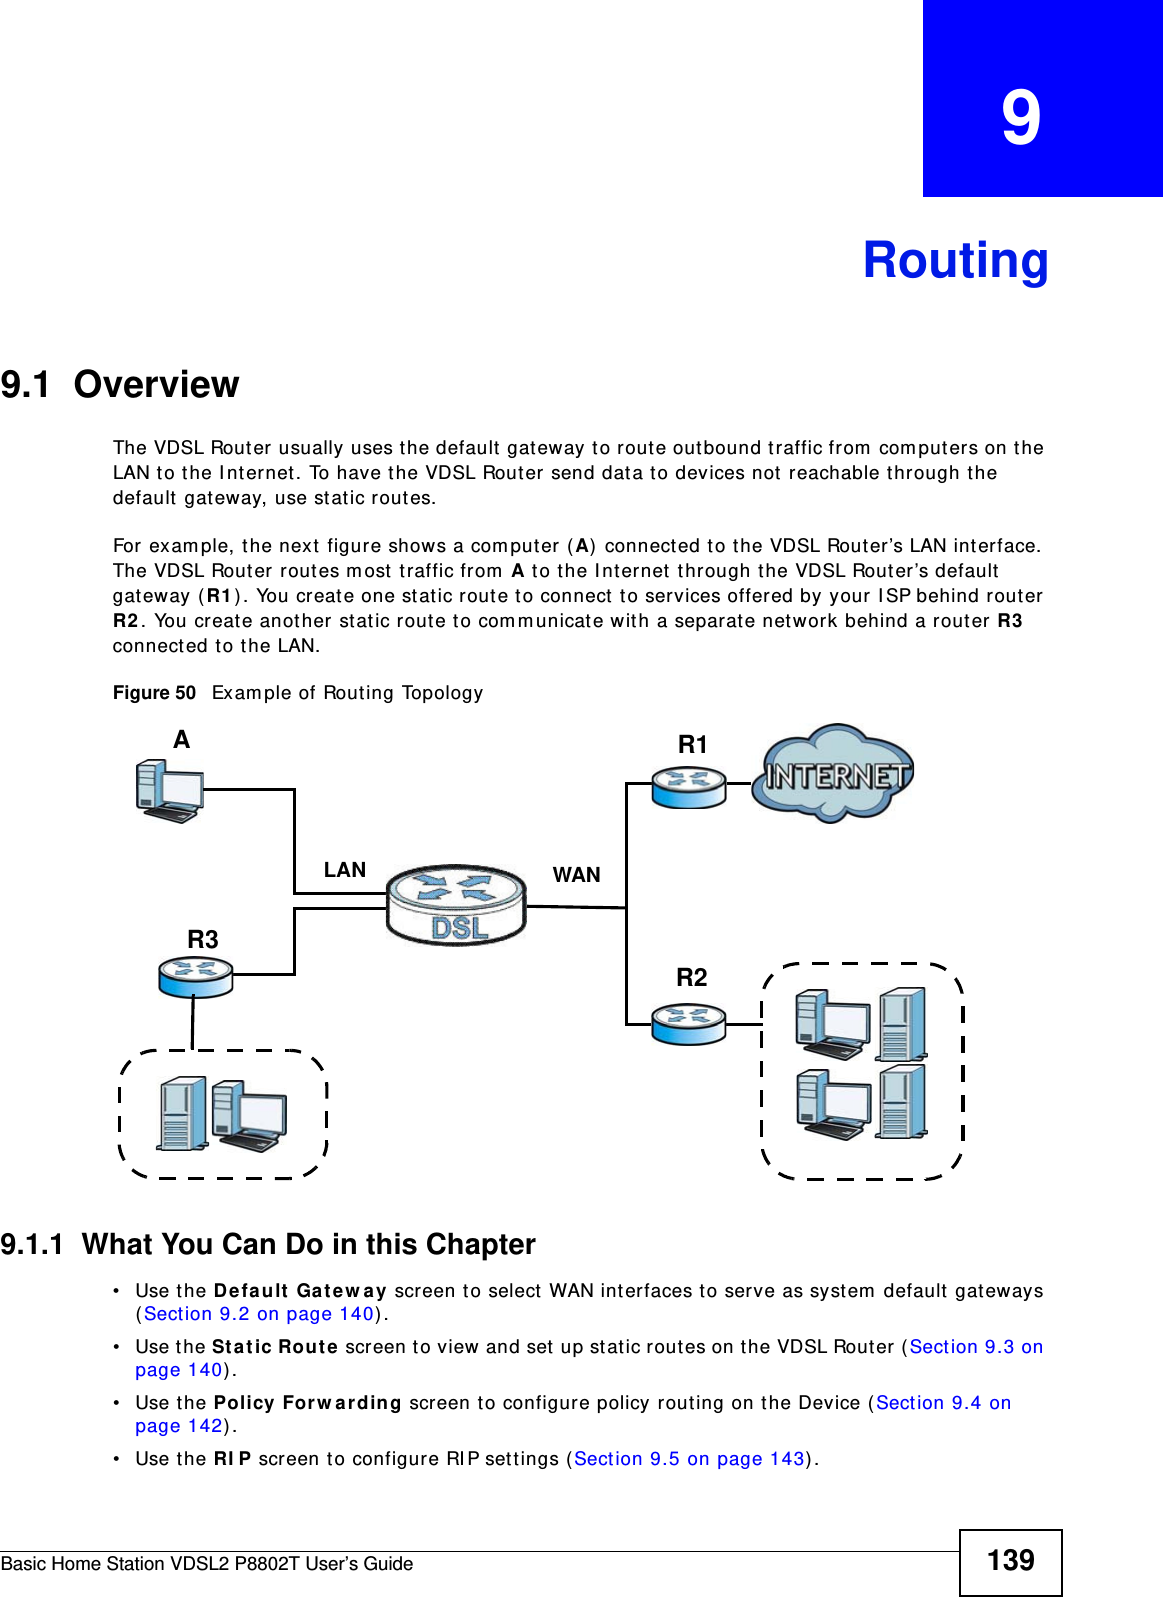 Basic Home Station VDSL2 P8802T User’s Guide 139CHAPTER   9Routing9.1  Overview The VDSL Rout er usually uses t he default gat ew ay t o rout e out bound t raffic from  com put ers on the LAN t o t he I nternet . To have t he VDSL Router send dat a t o devices not  reachable t hrough t he default gat eway, use st at ic routes.For  exam ple, t he next figure shows a computer  (A)  connected to the VDSL Rout er’s LAN int erface. The VDSL Router routes m ost  traffic from  A to the I nt ernet  t hrough the VDSL Router’s default gat eway (R1 ) . You creat e one st atic route to connect  t o services offered by your I SP behind rout er R2 . You creat e anot her st at ic route t o com m unicate with a separate net work behind a rout er R3  connect ed to t he LAN.   Figure 50   Exam ple of Routing Topology9.1.1  What You Can Do in this Chapter• Use the D efault Ga tew ay screen to select  WAN int erfaces t o serve as syst em  default  gateways (Sect ion 9.2 on page 140) . • Use the Stat ic Rou t e screen t o view and set  up st at ic routes on t he VDSL Router (Sect ion 9.3 on page 140) .• Use the Policy  For w a rding screen to configure policy rout ing on the Device ( Sect ion 9.4 on page 142) . • Use the RI P screen t o configure RI P sett ings ( Section 9.5 on page 143) .WANR1R2AR3LAN